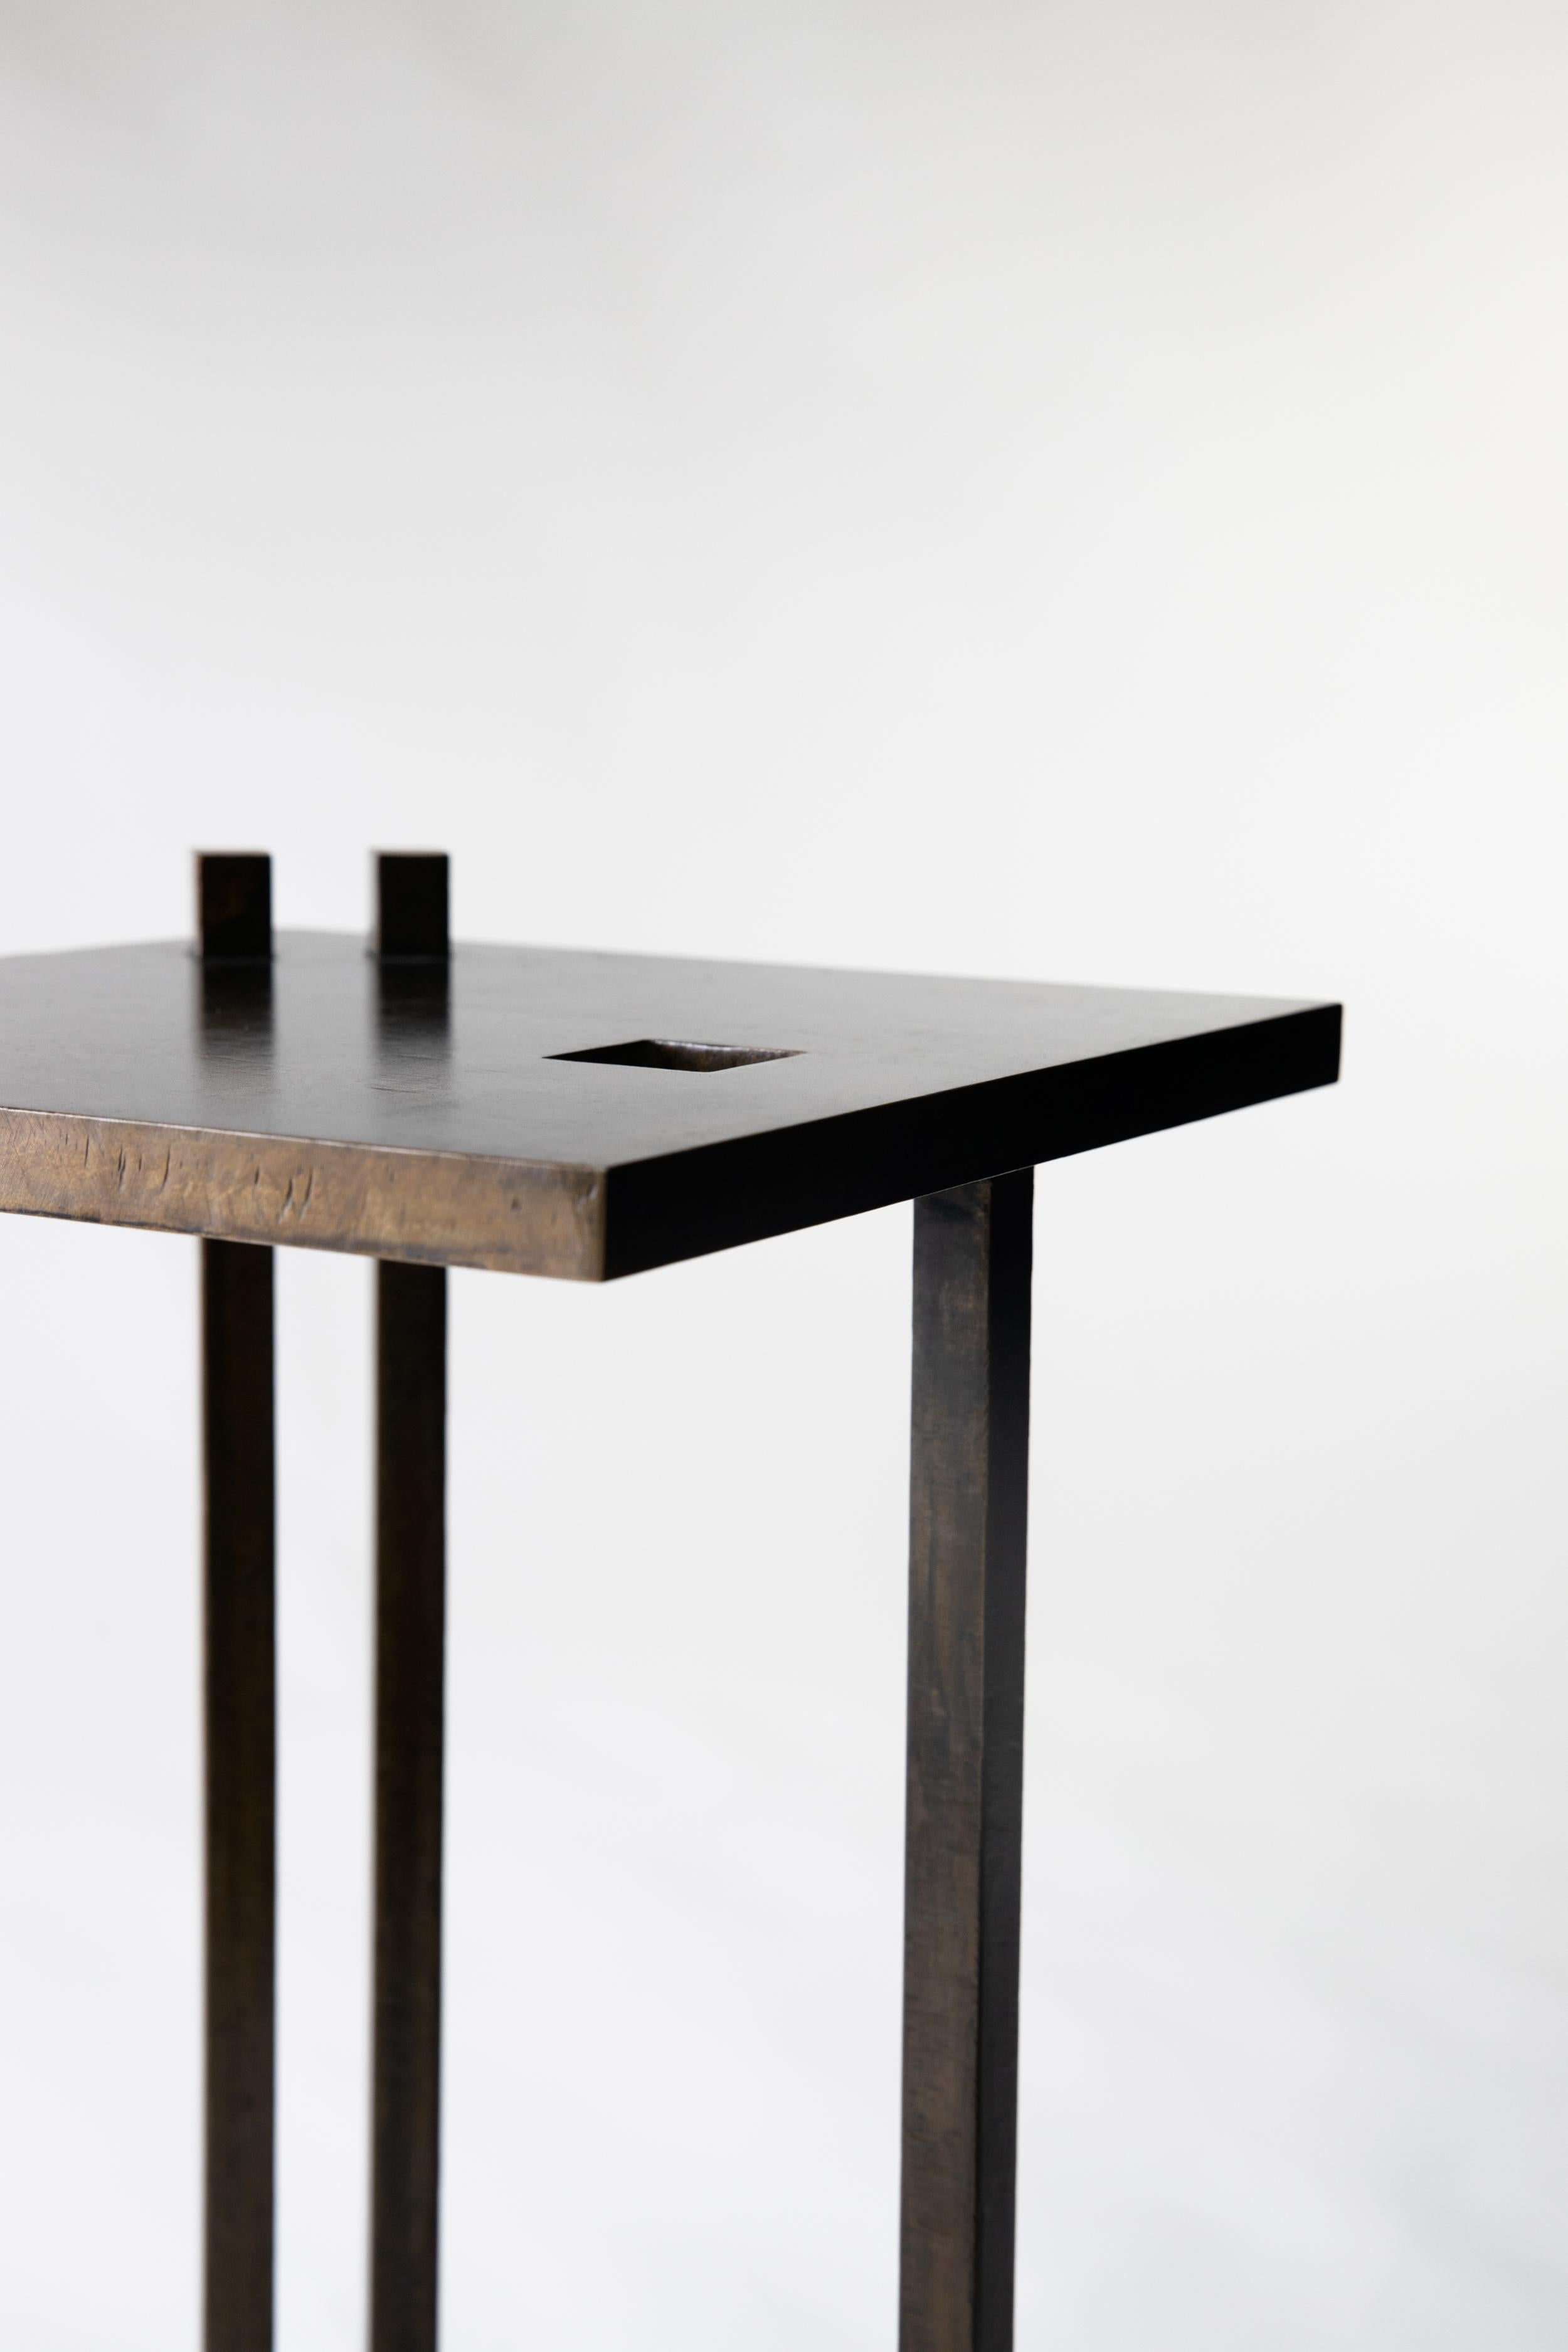 Bronzed Modern/Contemporary Steel Side Table Linear Cutout Protrusion Geometric In New Condition For Sale In Bronx, NY